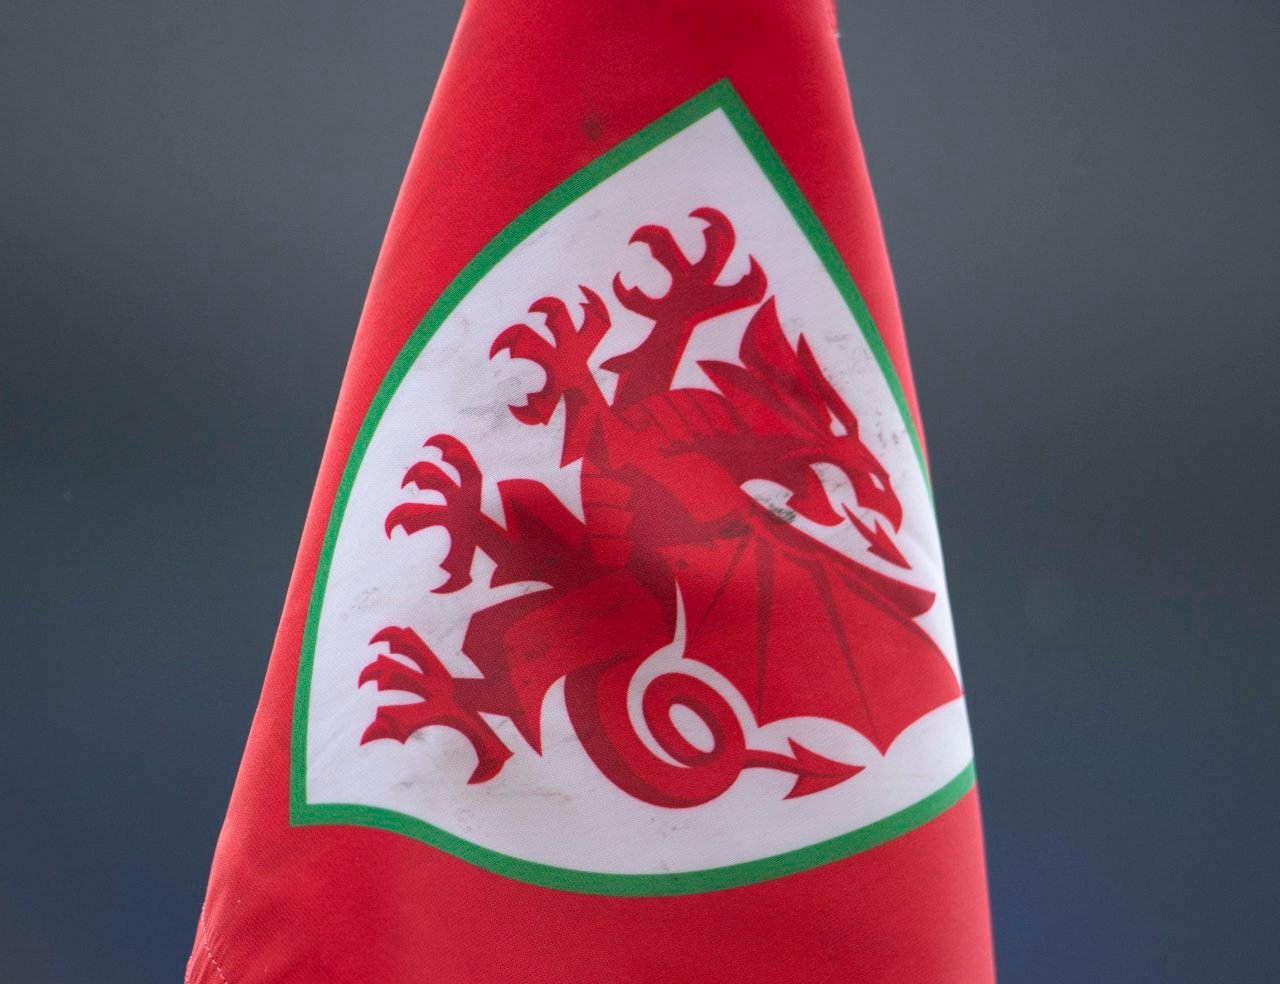 Report: Wales announce whether Brennan Johnson has been called up amid Spurs injury concerns